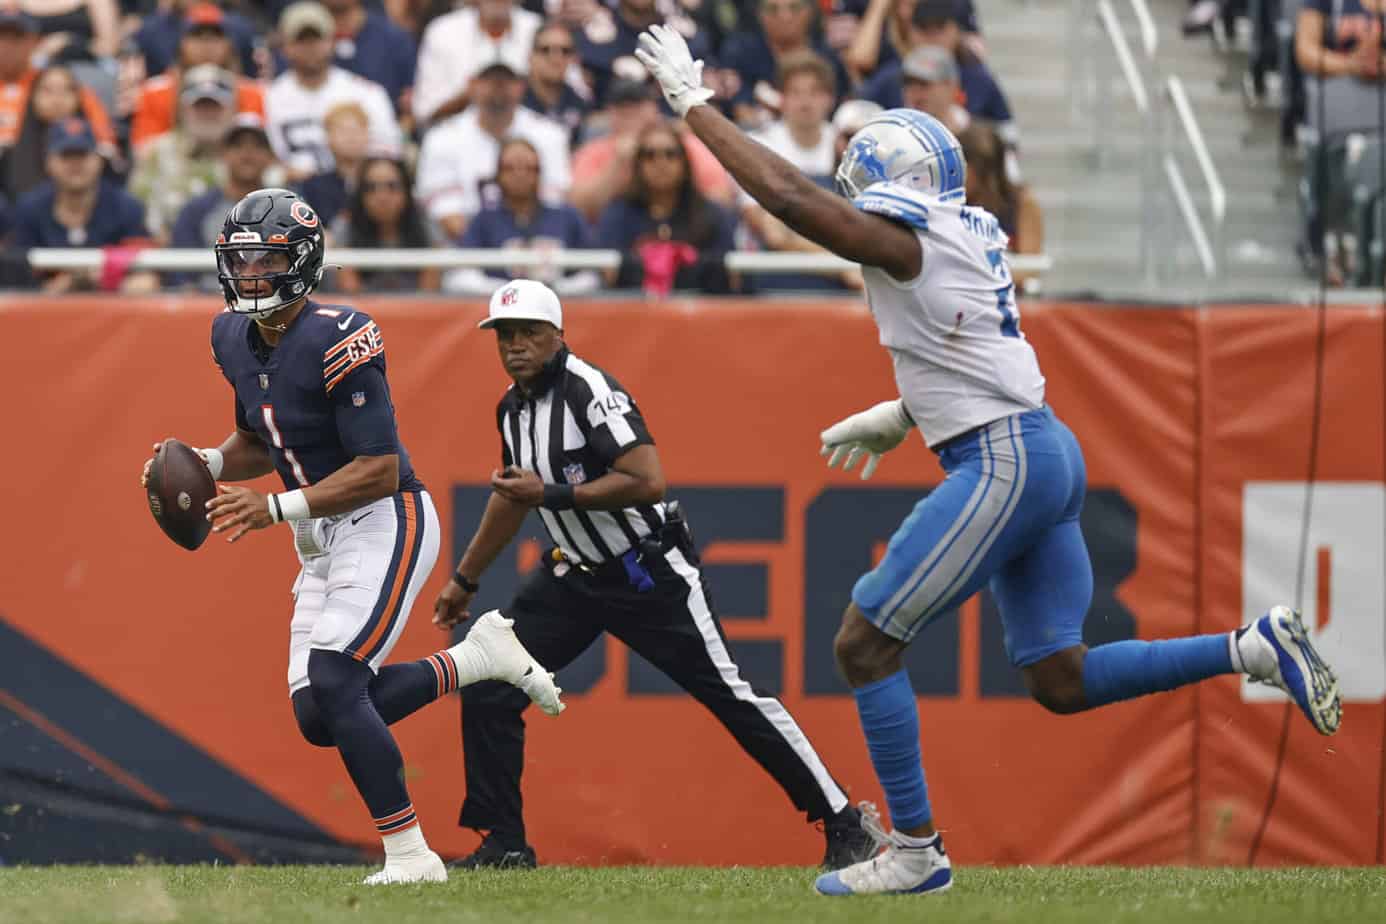 Lions vs. Bears Preview and Betting Odds